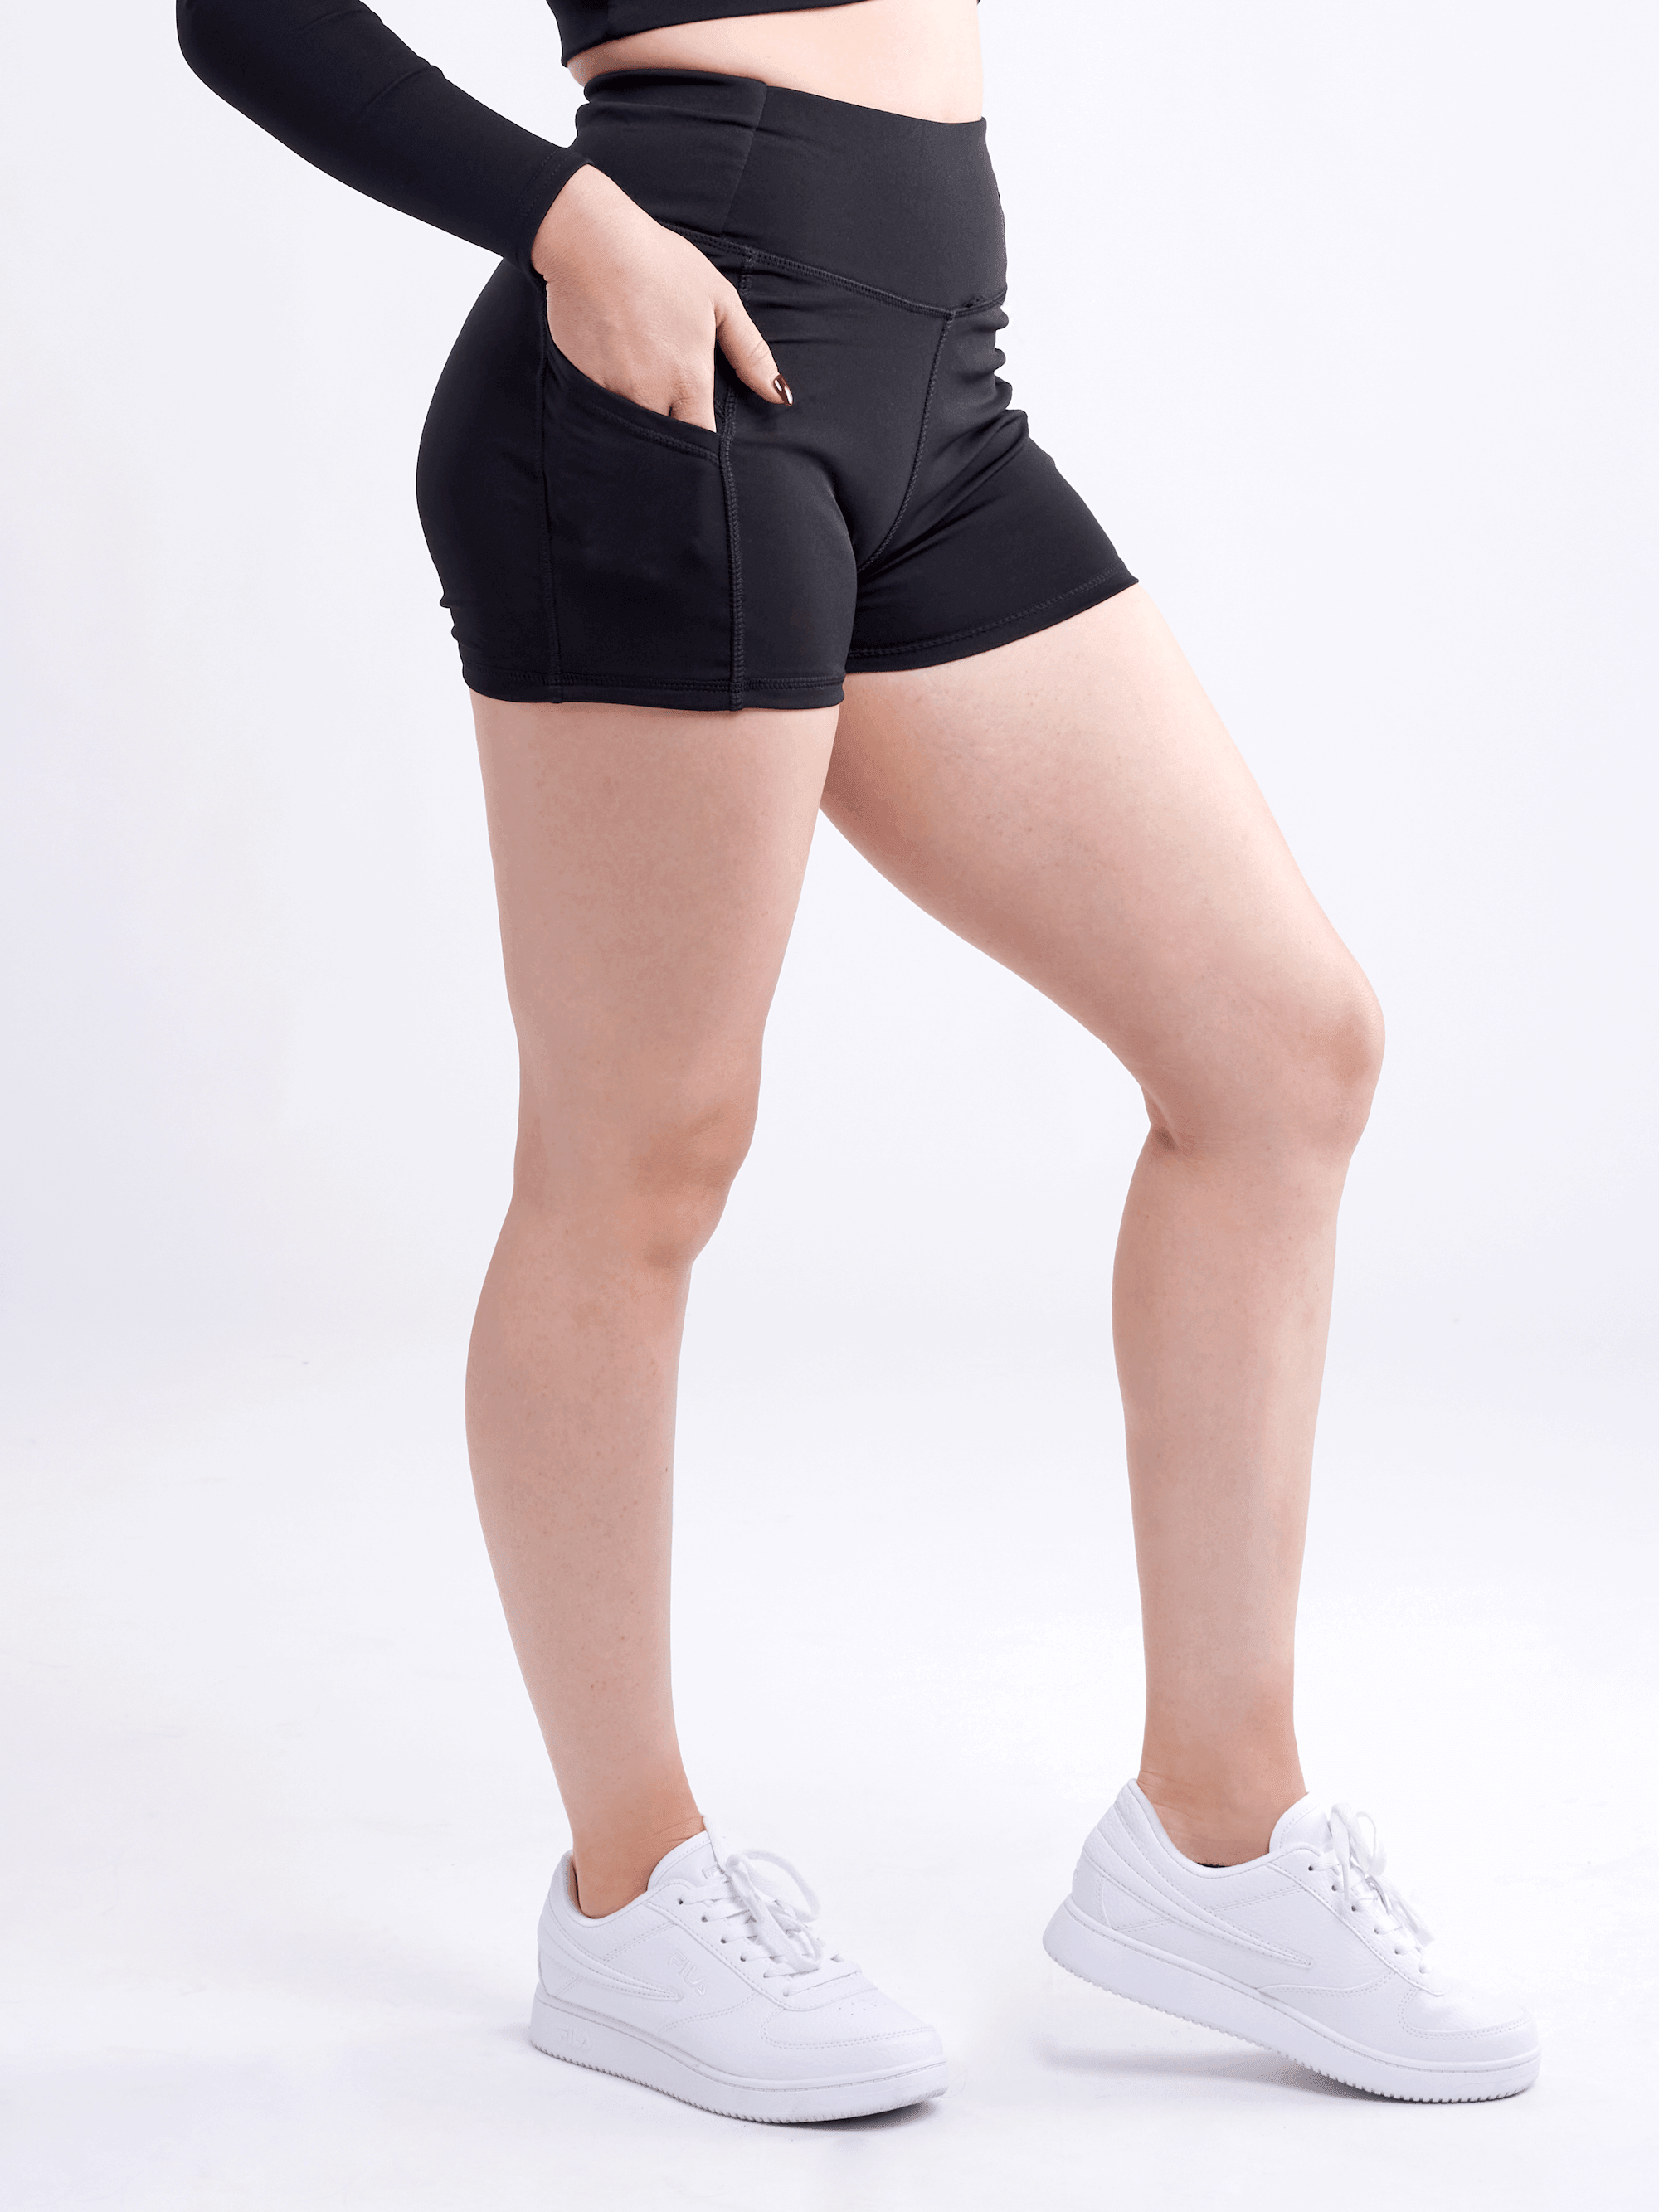 High-Waisted Athletic Shorts with Side Pockets - VirtuousWares:Global